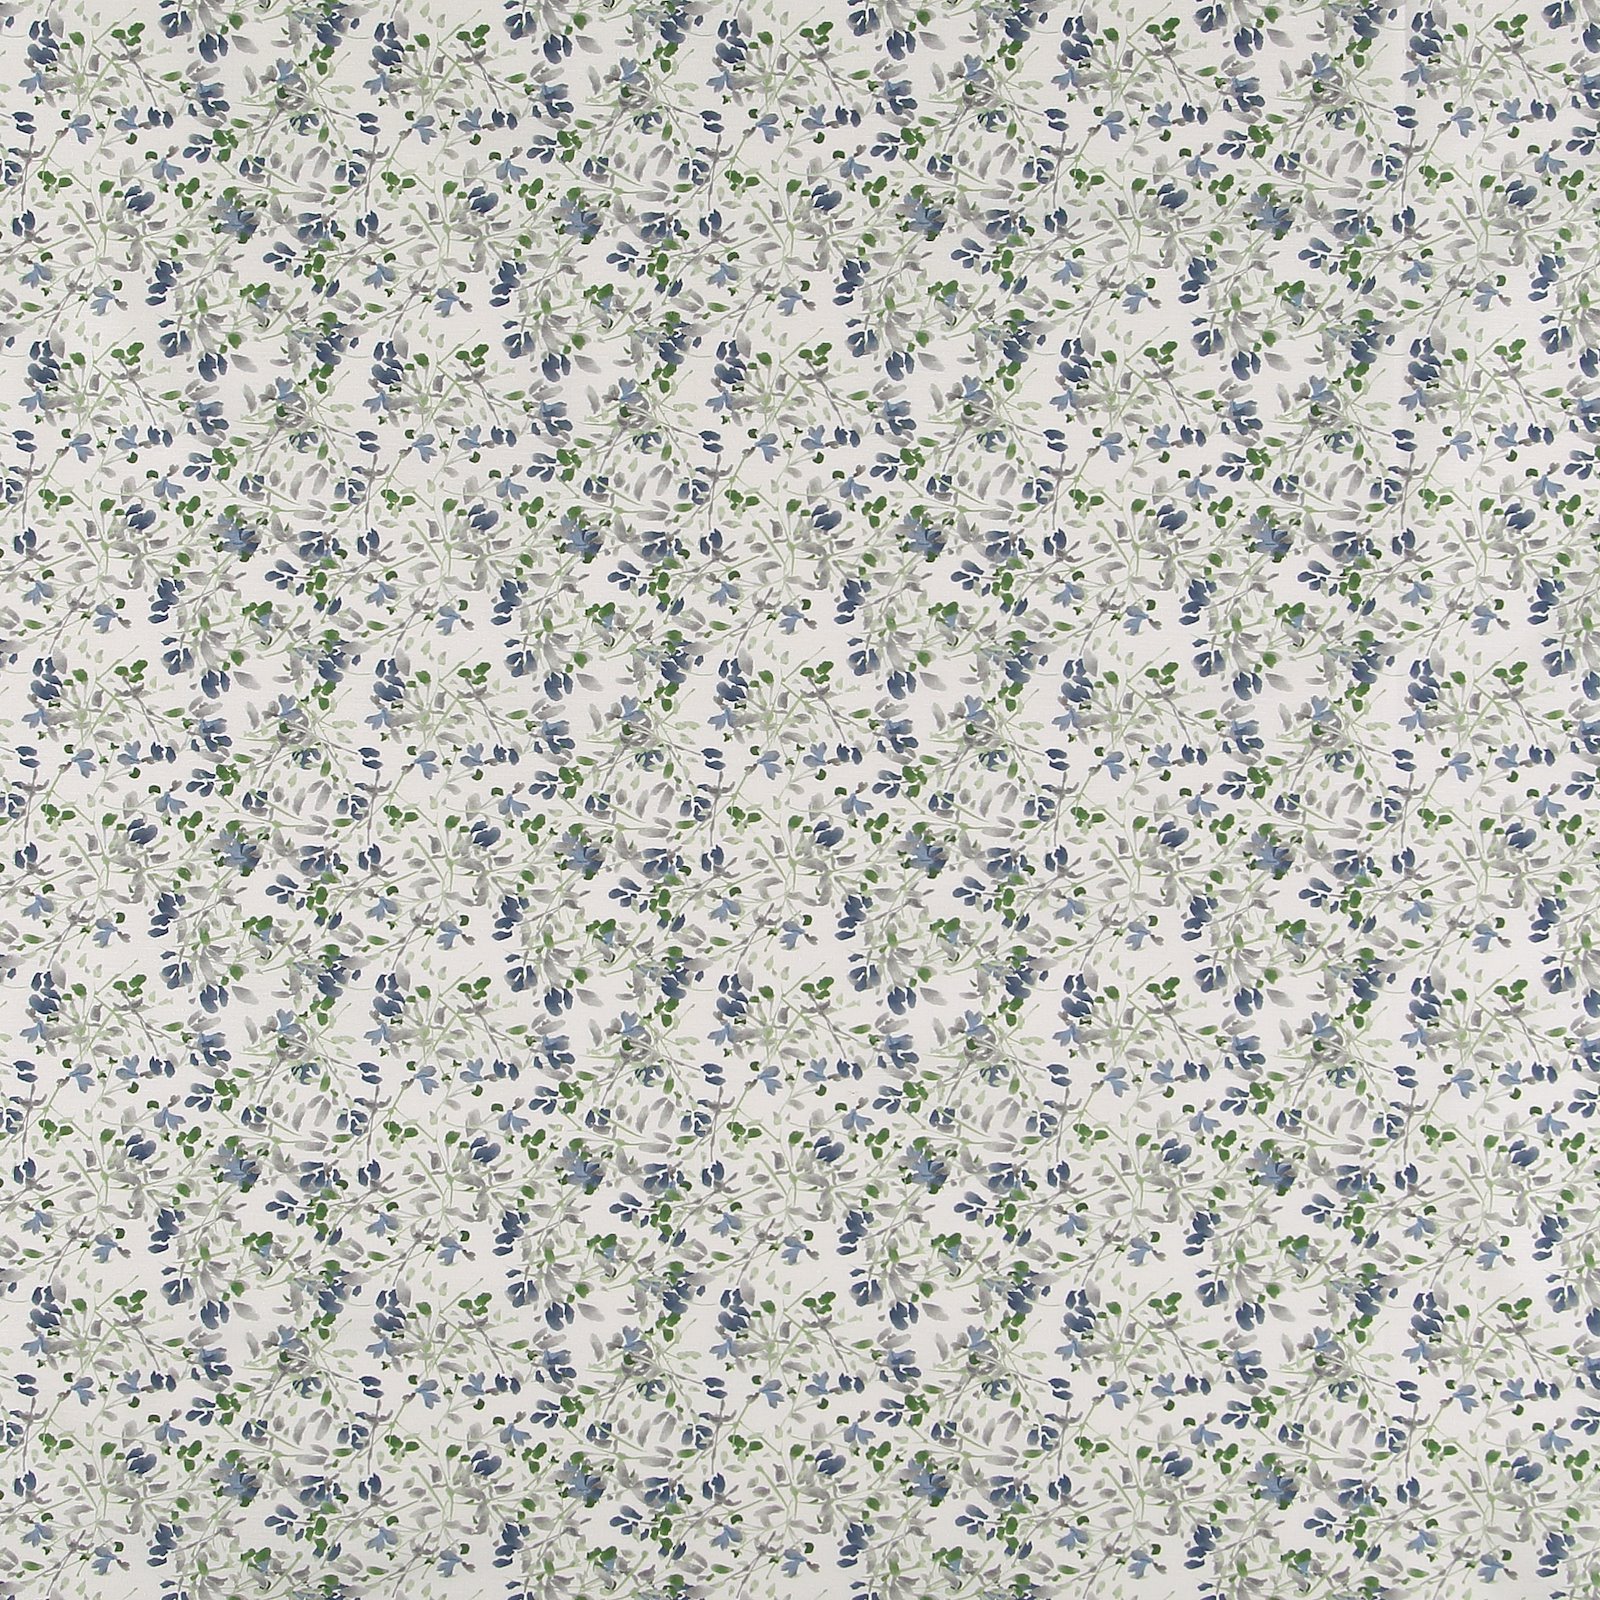 Woven white with blue/grey/green flowers 750370_pack_sp